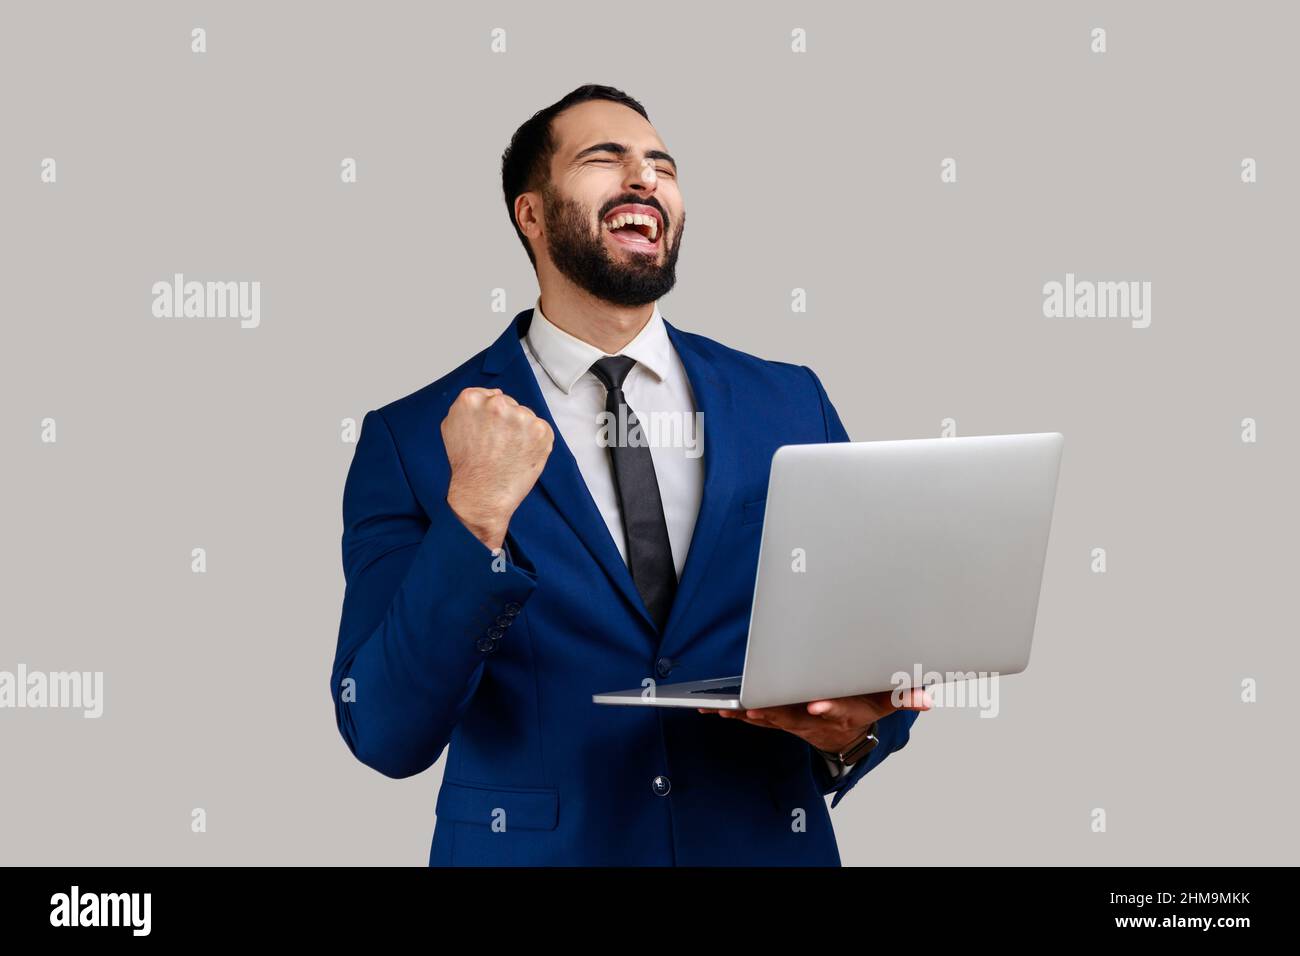 Portrait of excited bearded businessman screaming with joy and holding laptop, rejoicing victory, online betting, wearing official style suit. Indoor studio shot isolated on gray background. Stock Photo